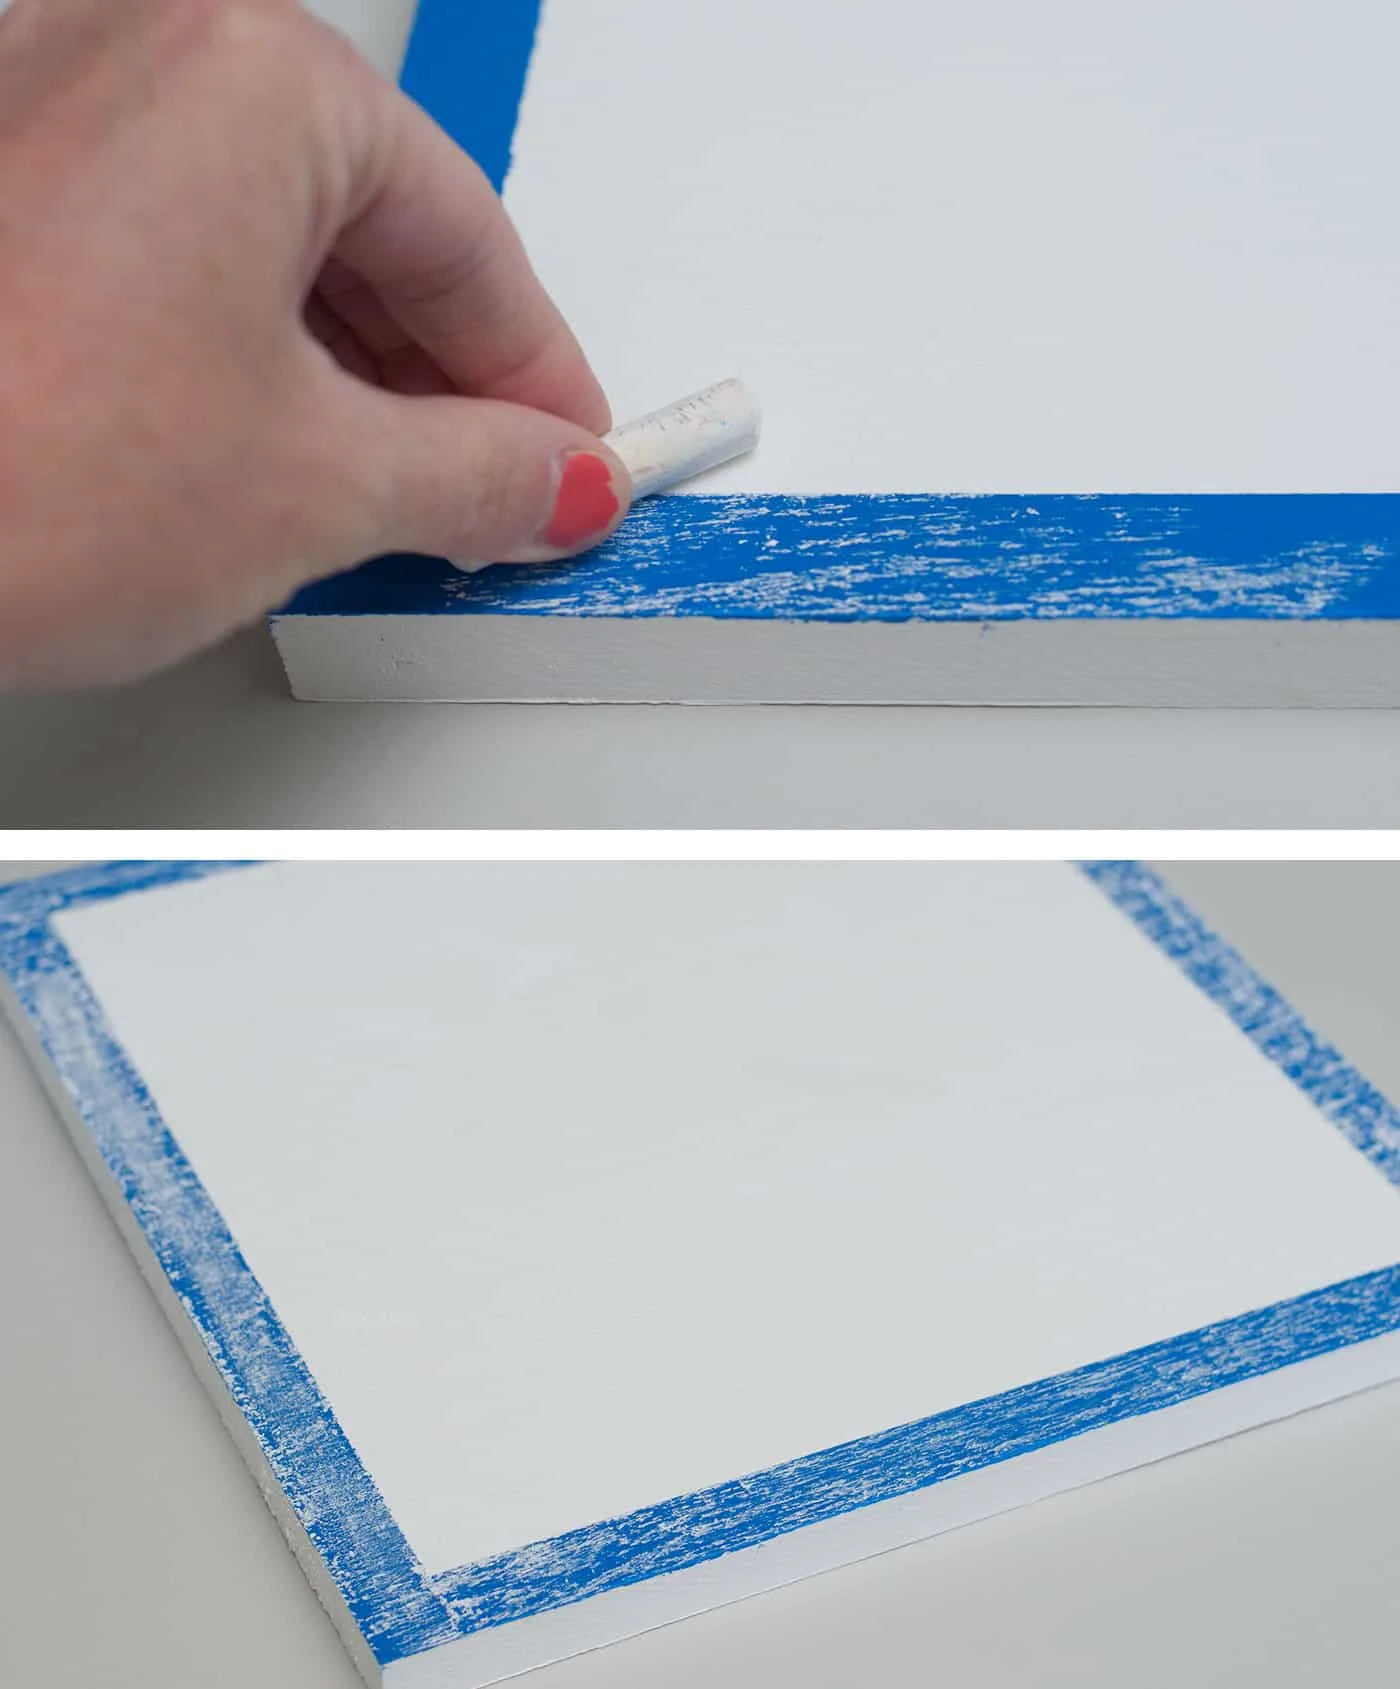 Conditioning the chalkboard with a piece of white chalk